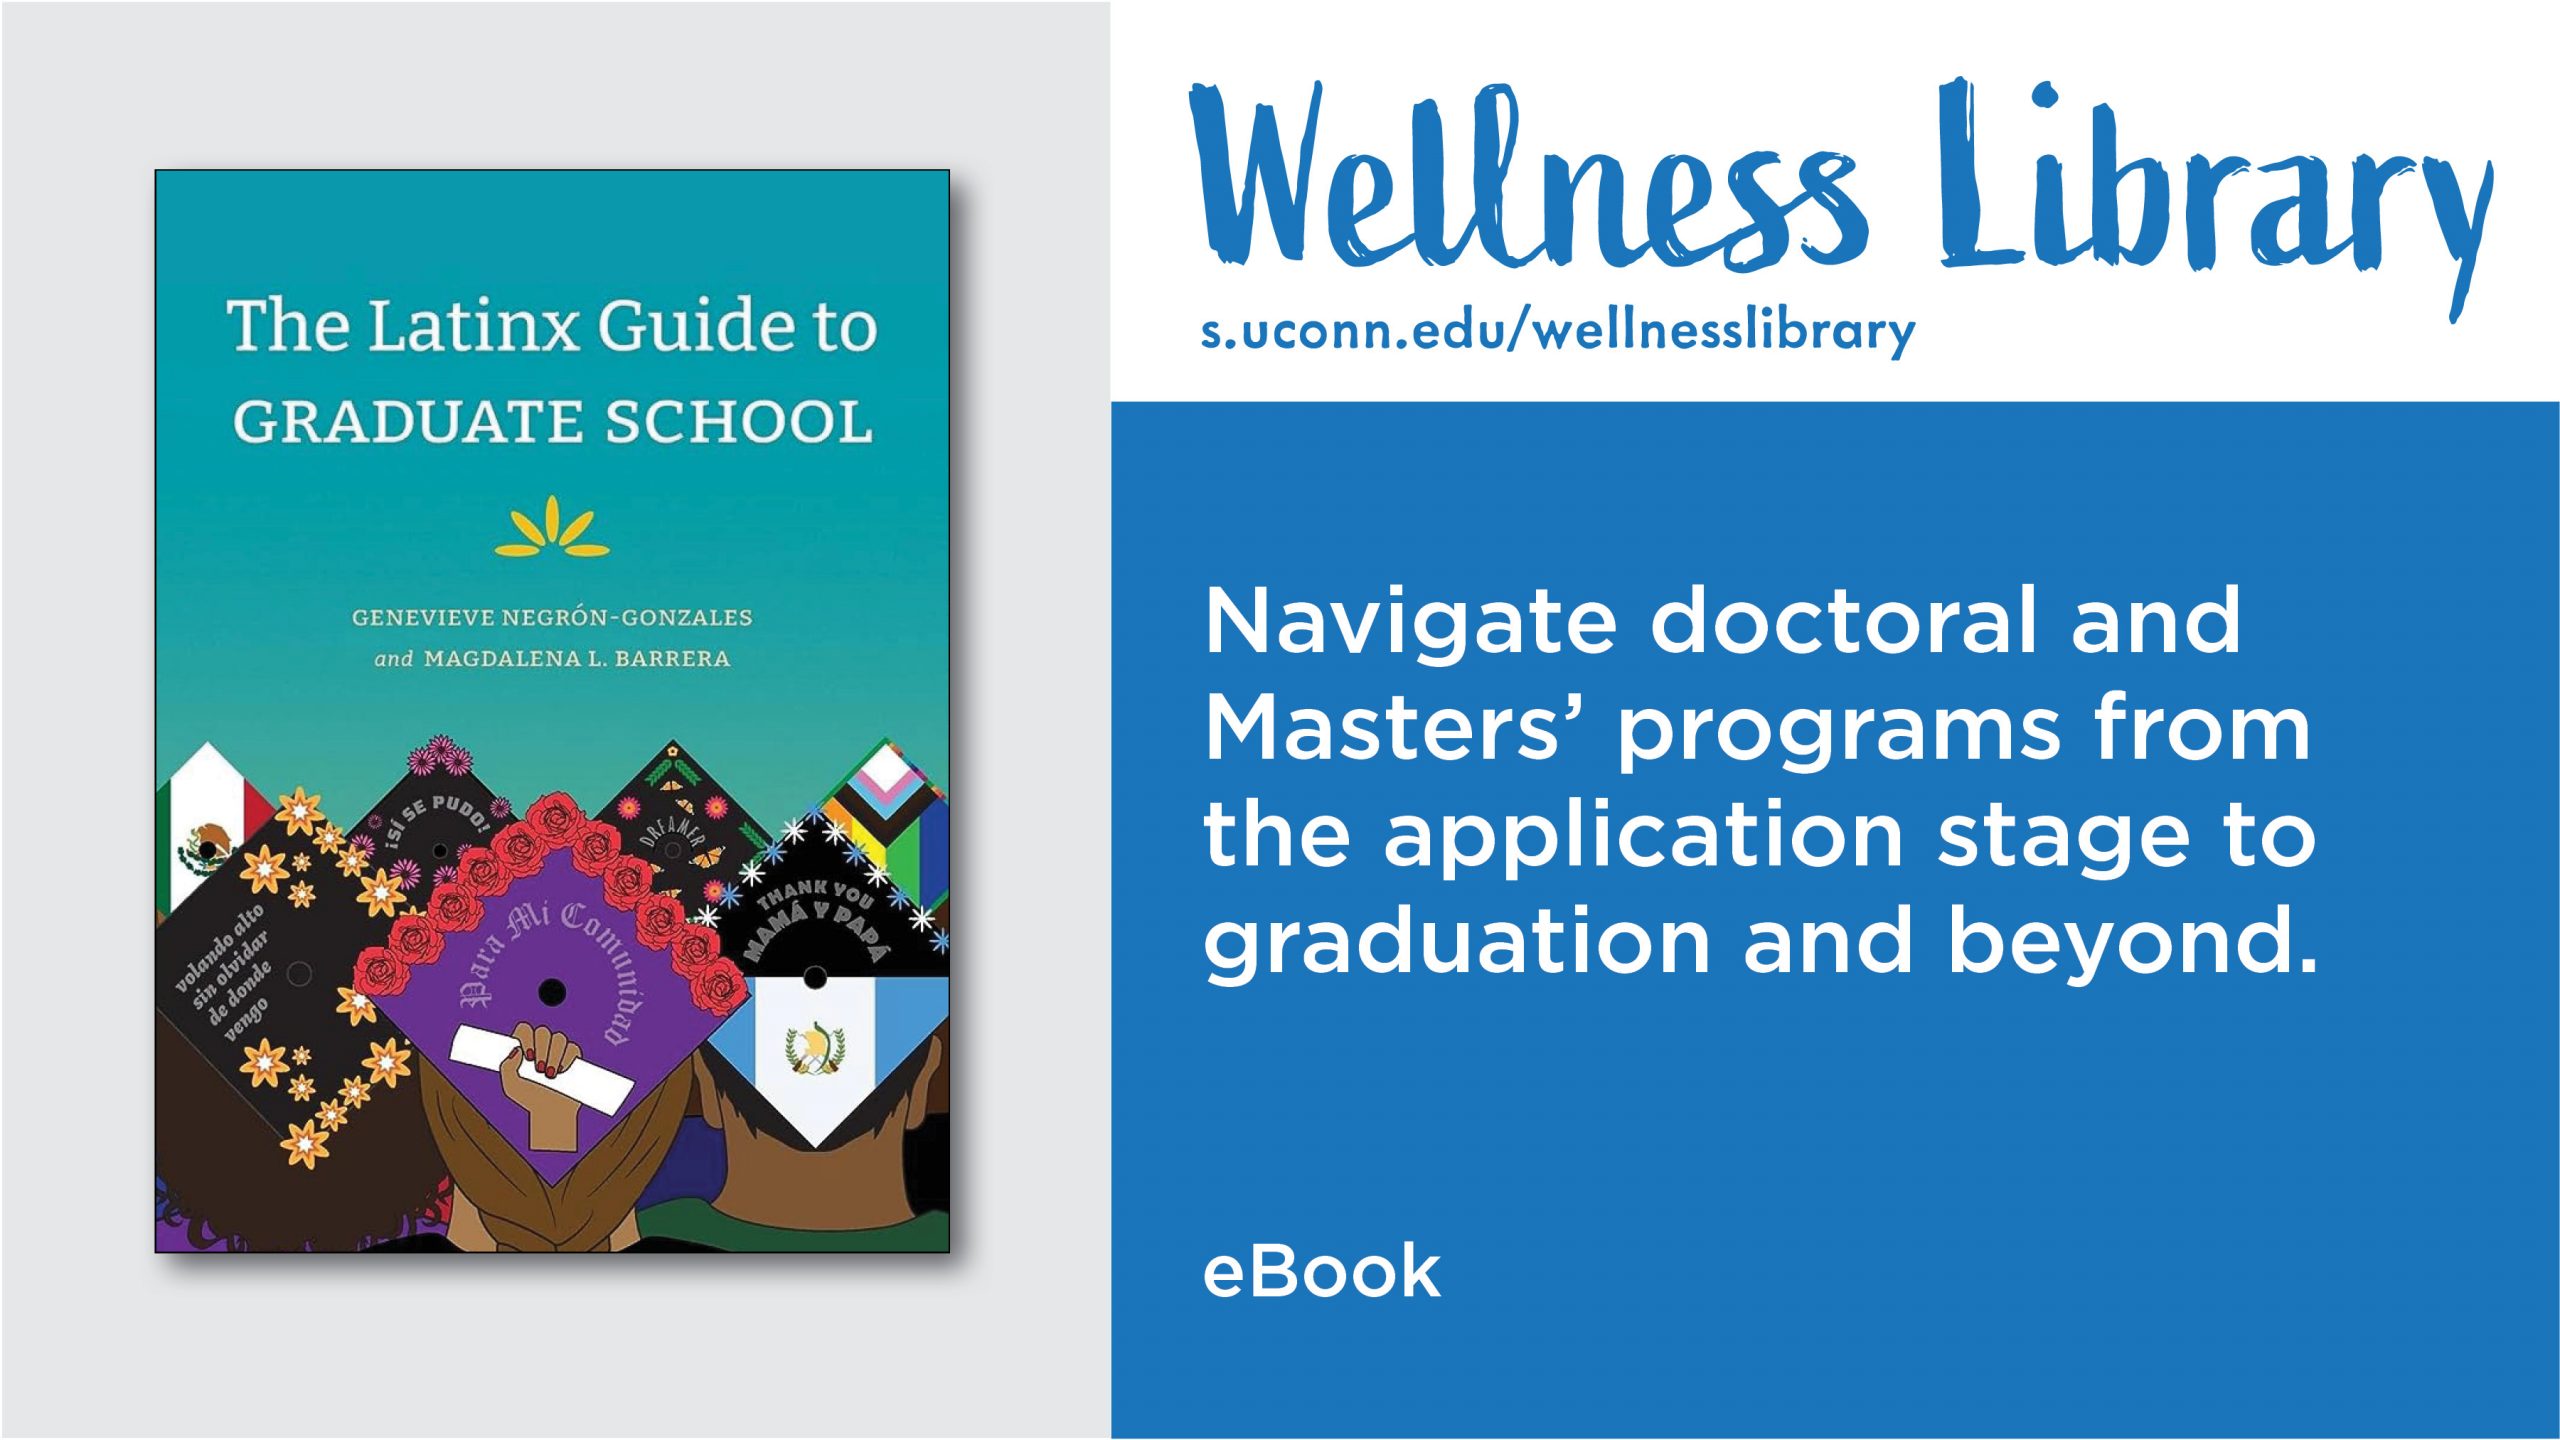 Wellness Library Featured Title: The Latinx Guide to Graduate School by Genevieve Negron-Gonzales and Magdalena L. Barreras. Find this title and more at s.uconn.edu/WellnessLibrary